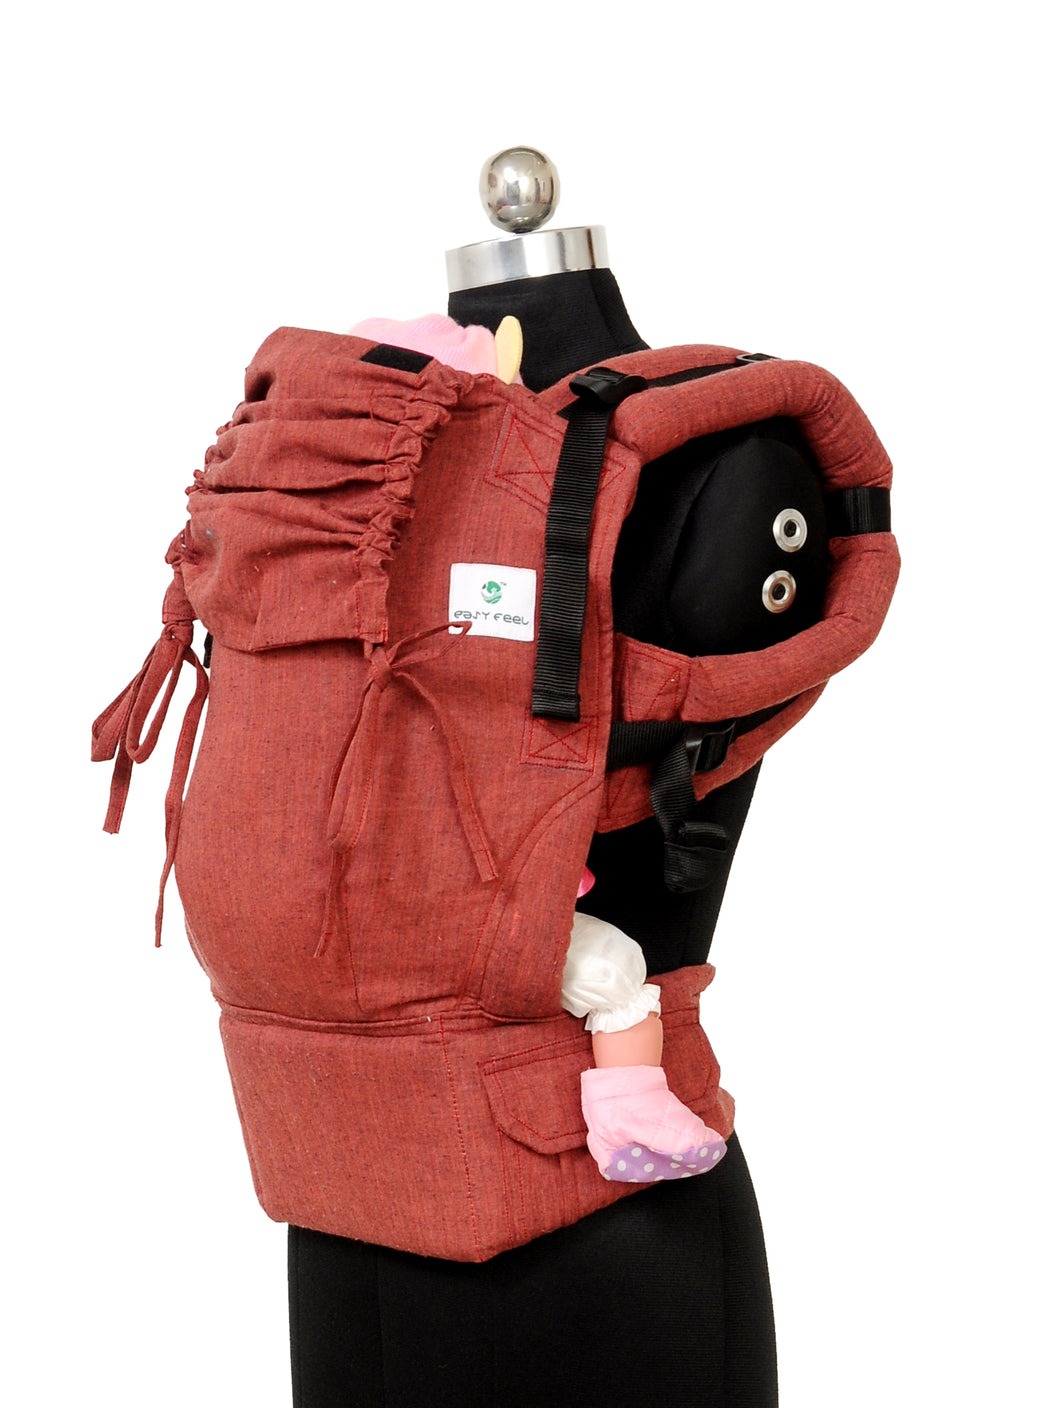 Toddler Soft Structured Carrier - Ruby